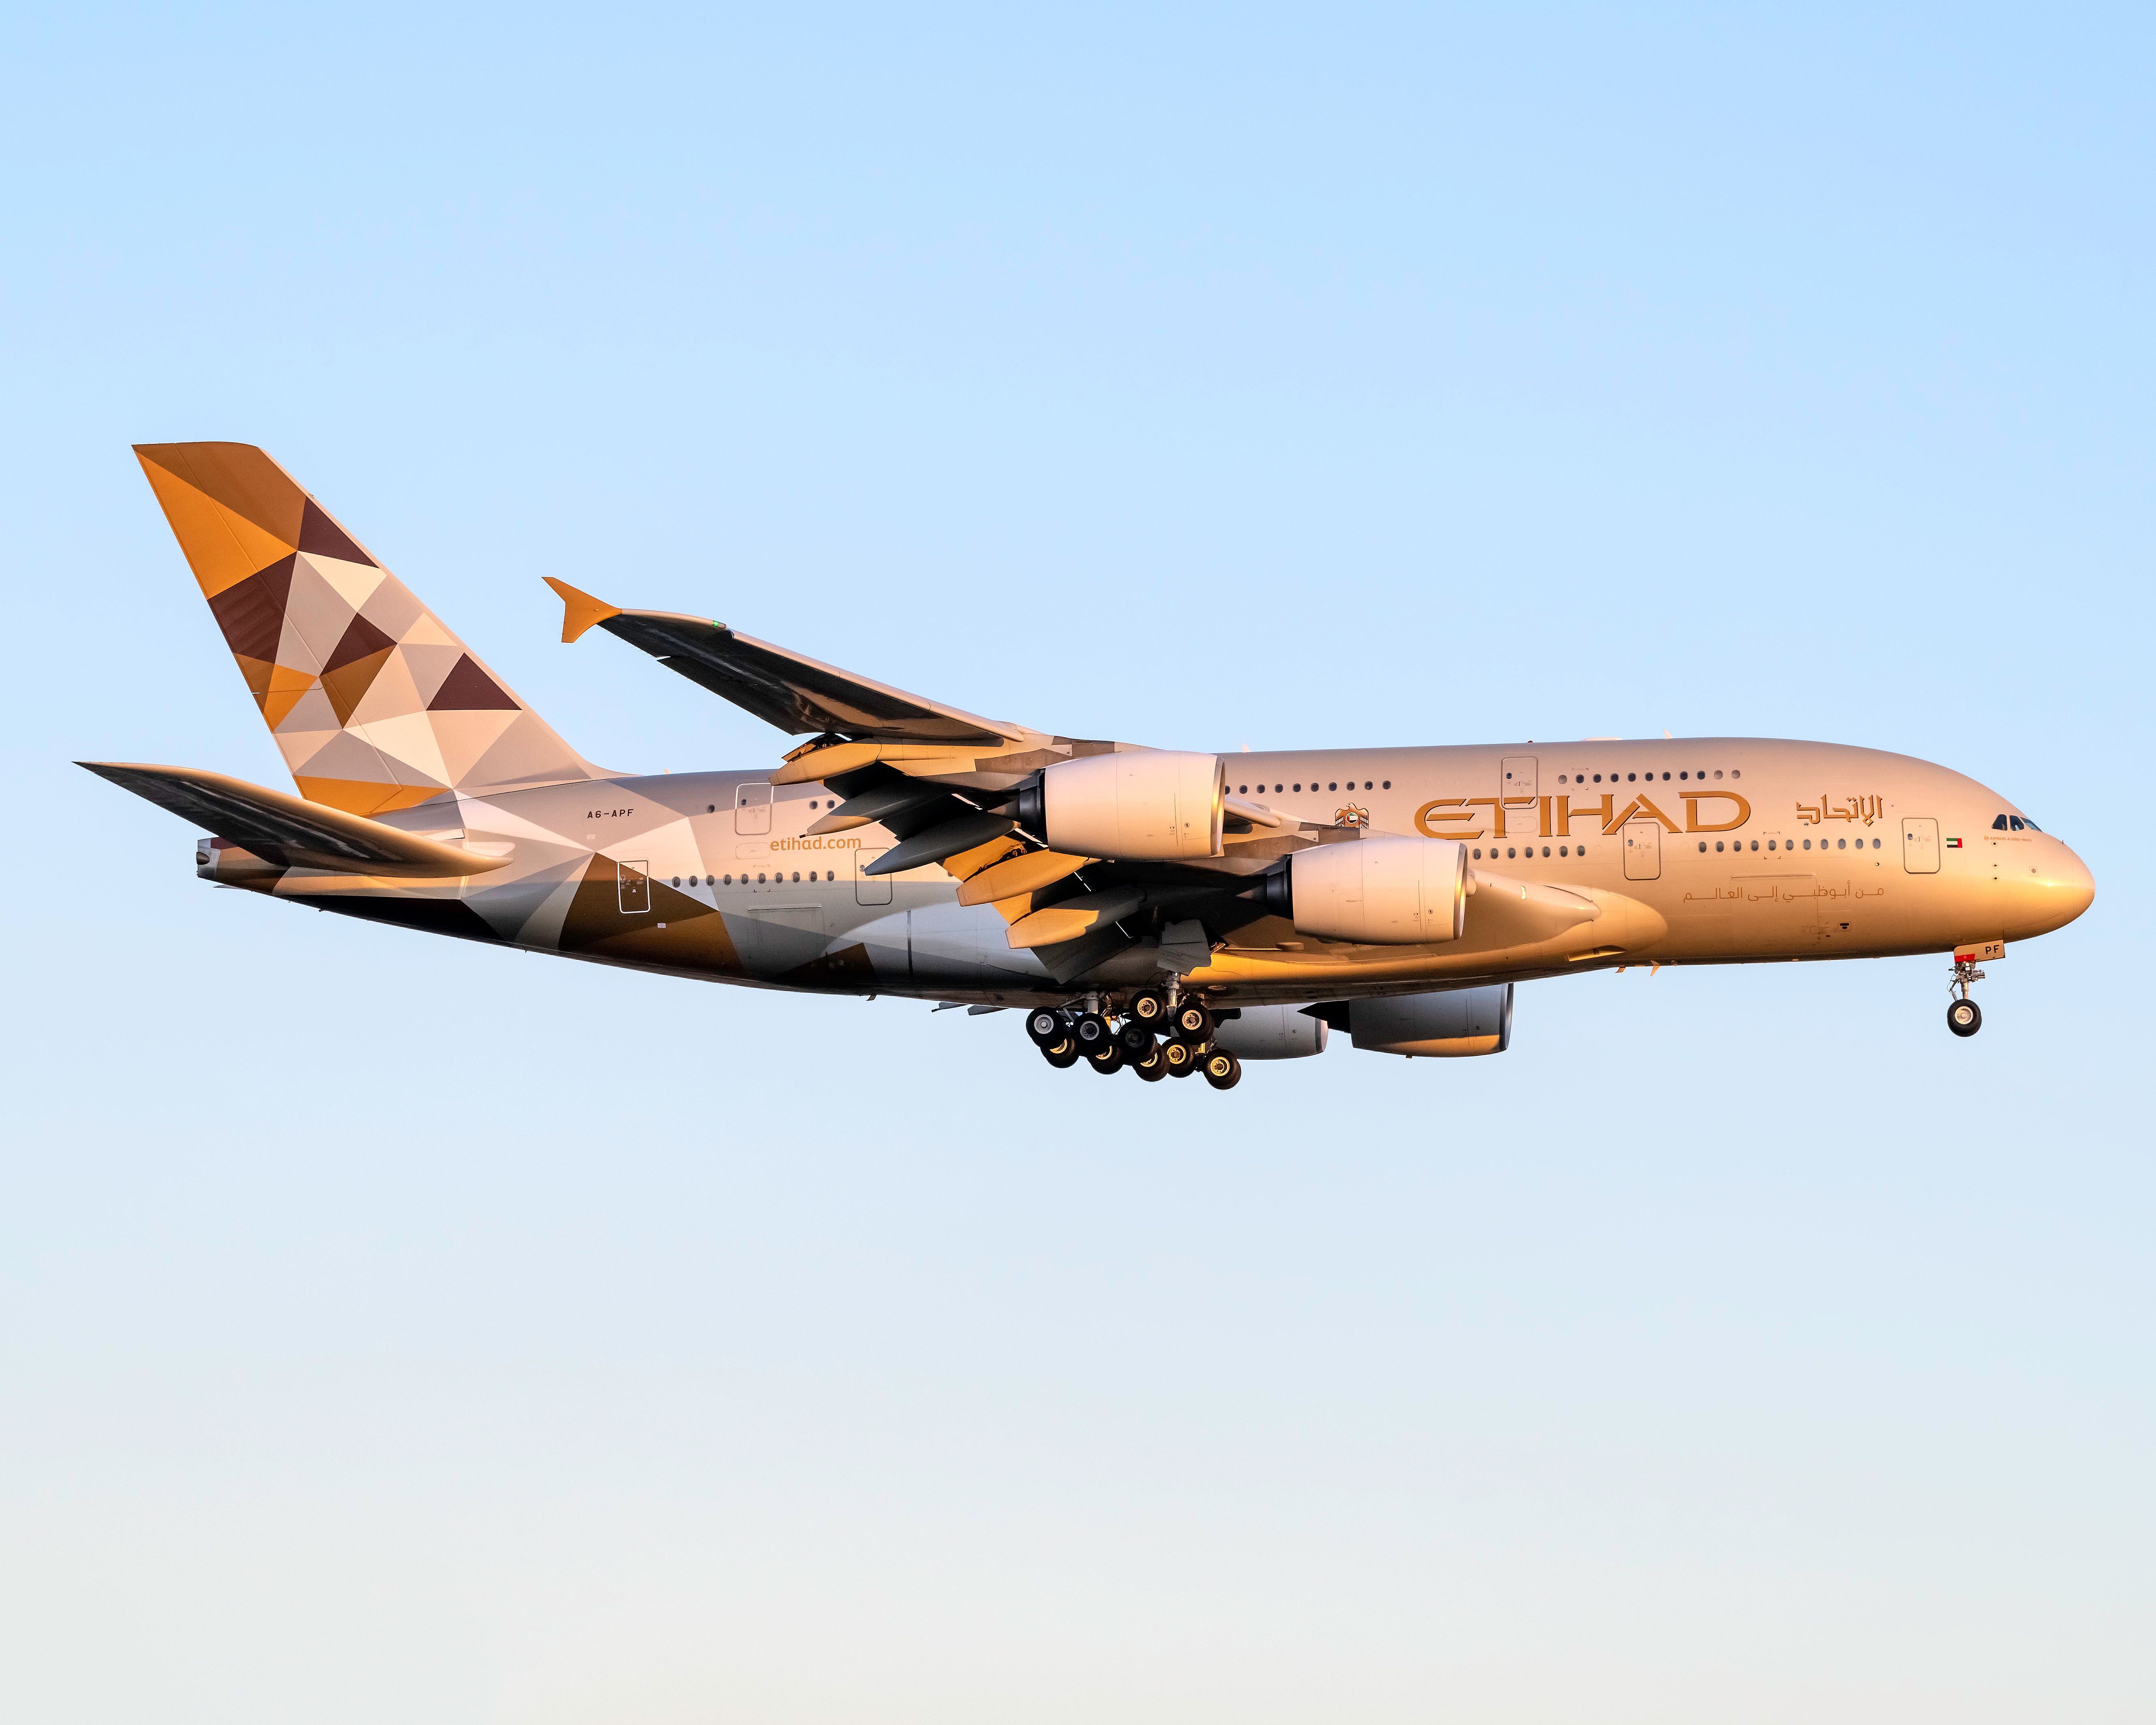 Etihad Still Reviewing The Business Case For the Airbus A380 'Very